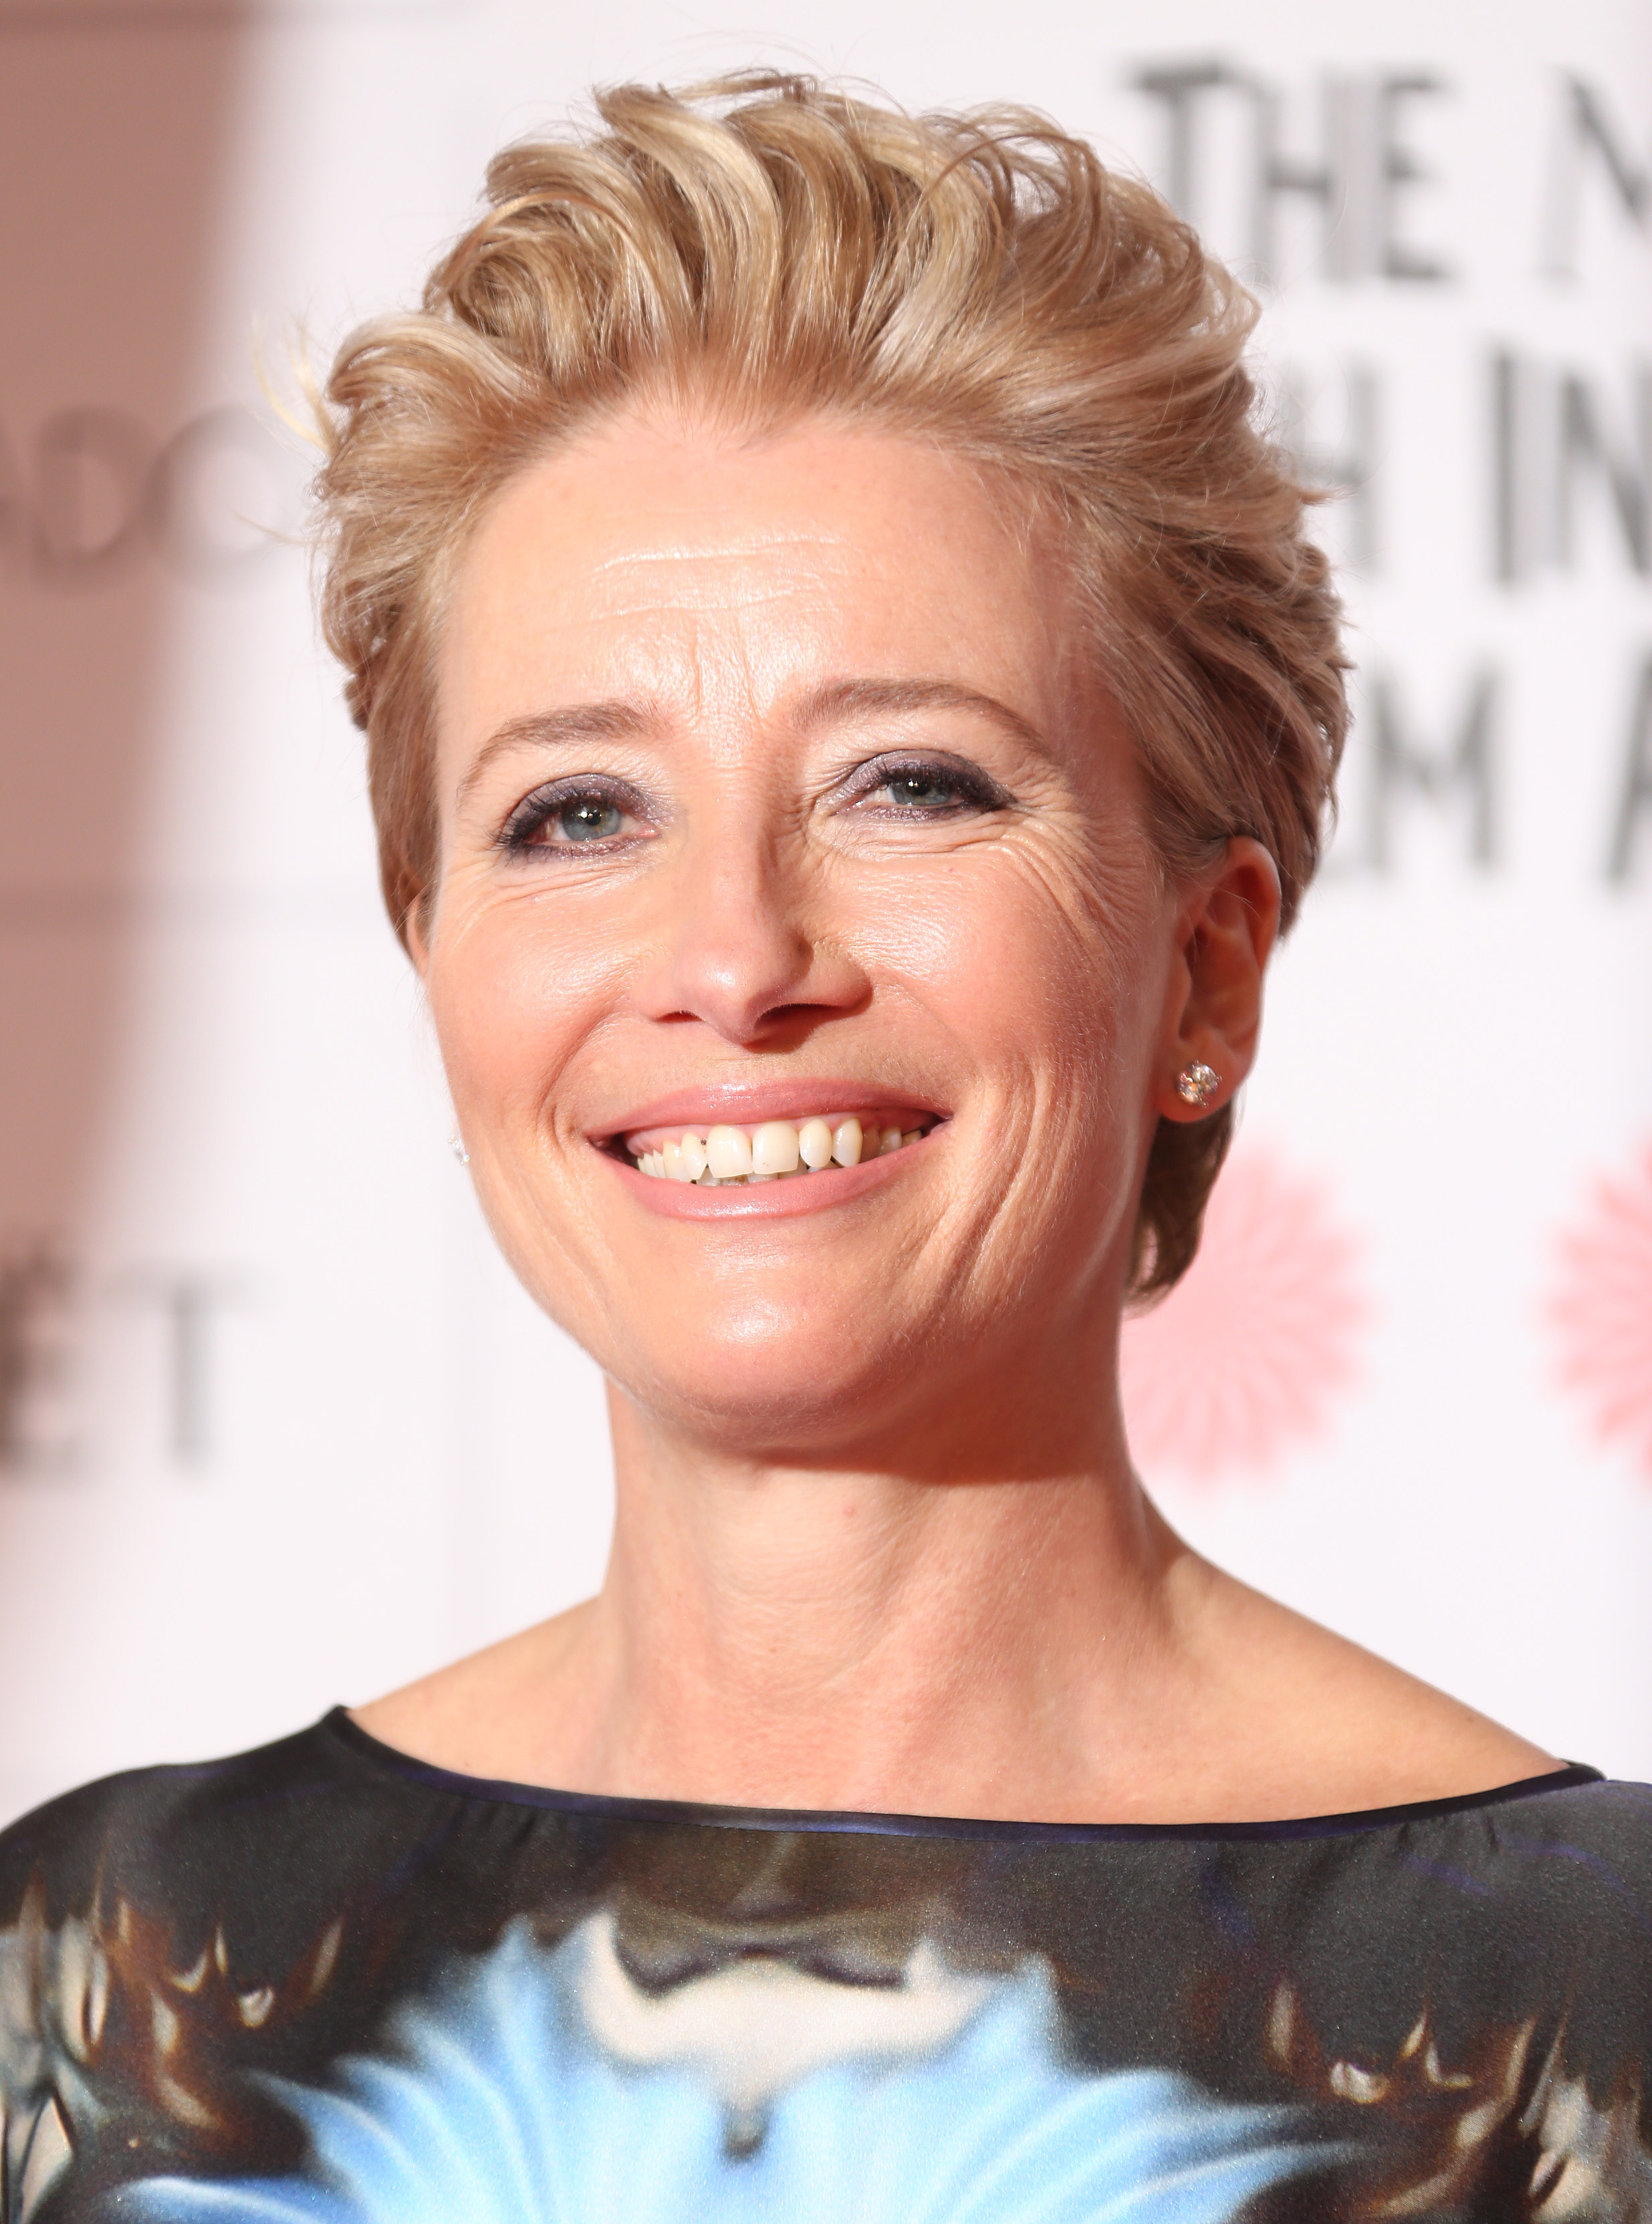 Actress Emma Thompson arrives for the British Independent Film Awards at Old Billingsgate Market in central London, Sunday, Dec. 7, 2014. (Joel Ryan—Invision/AP)